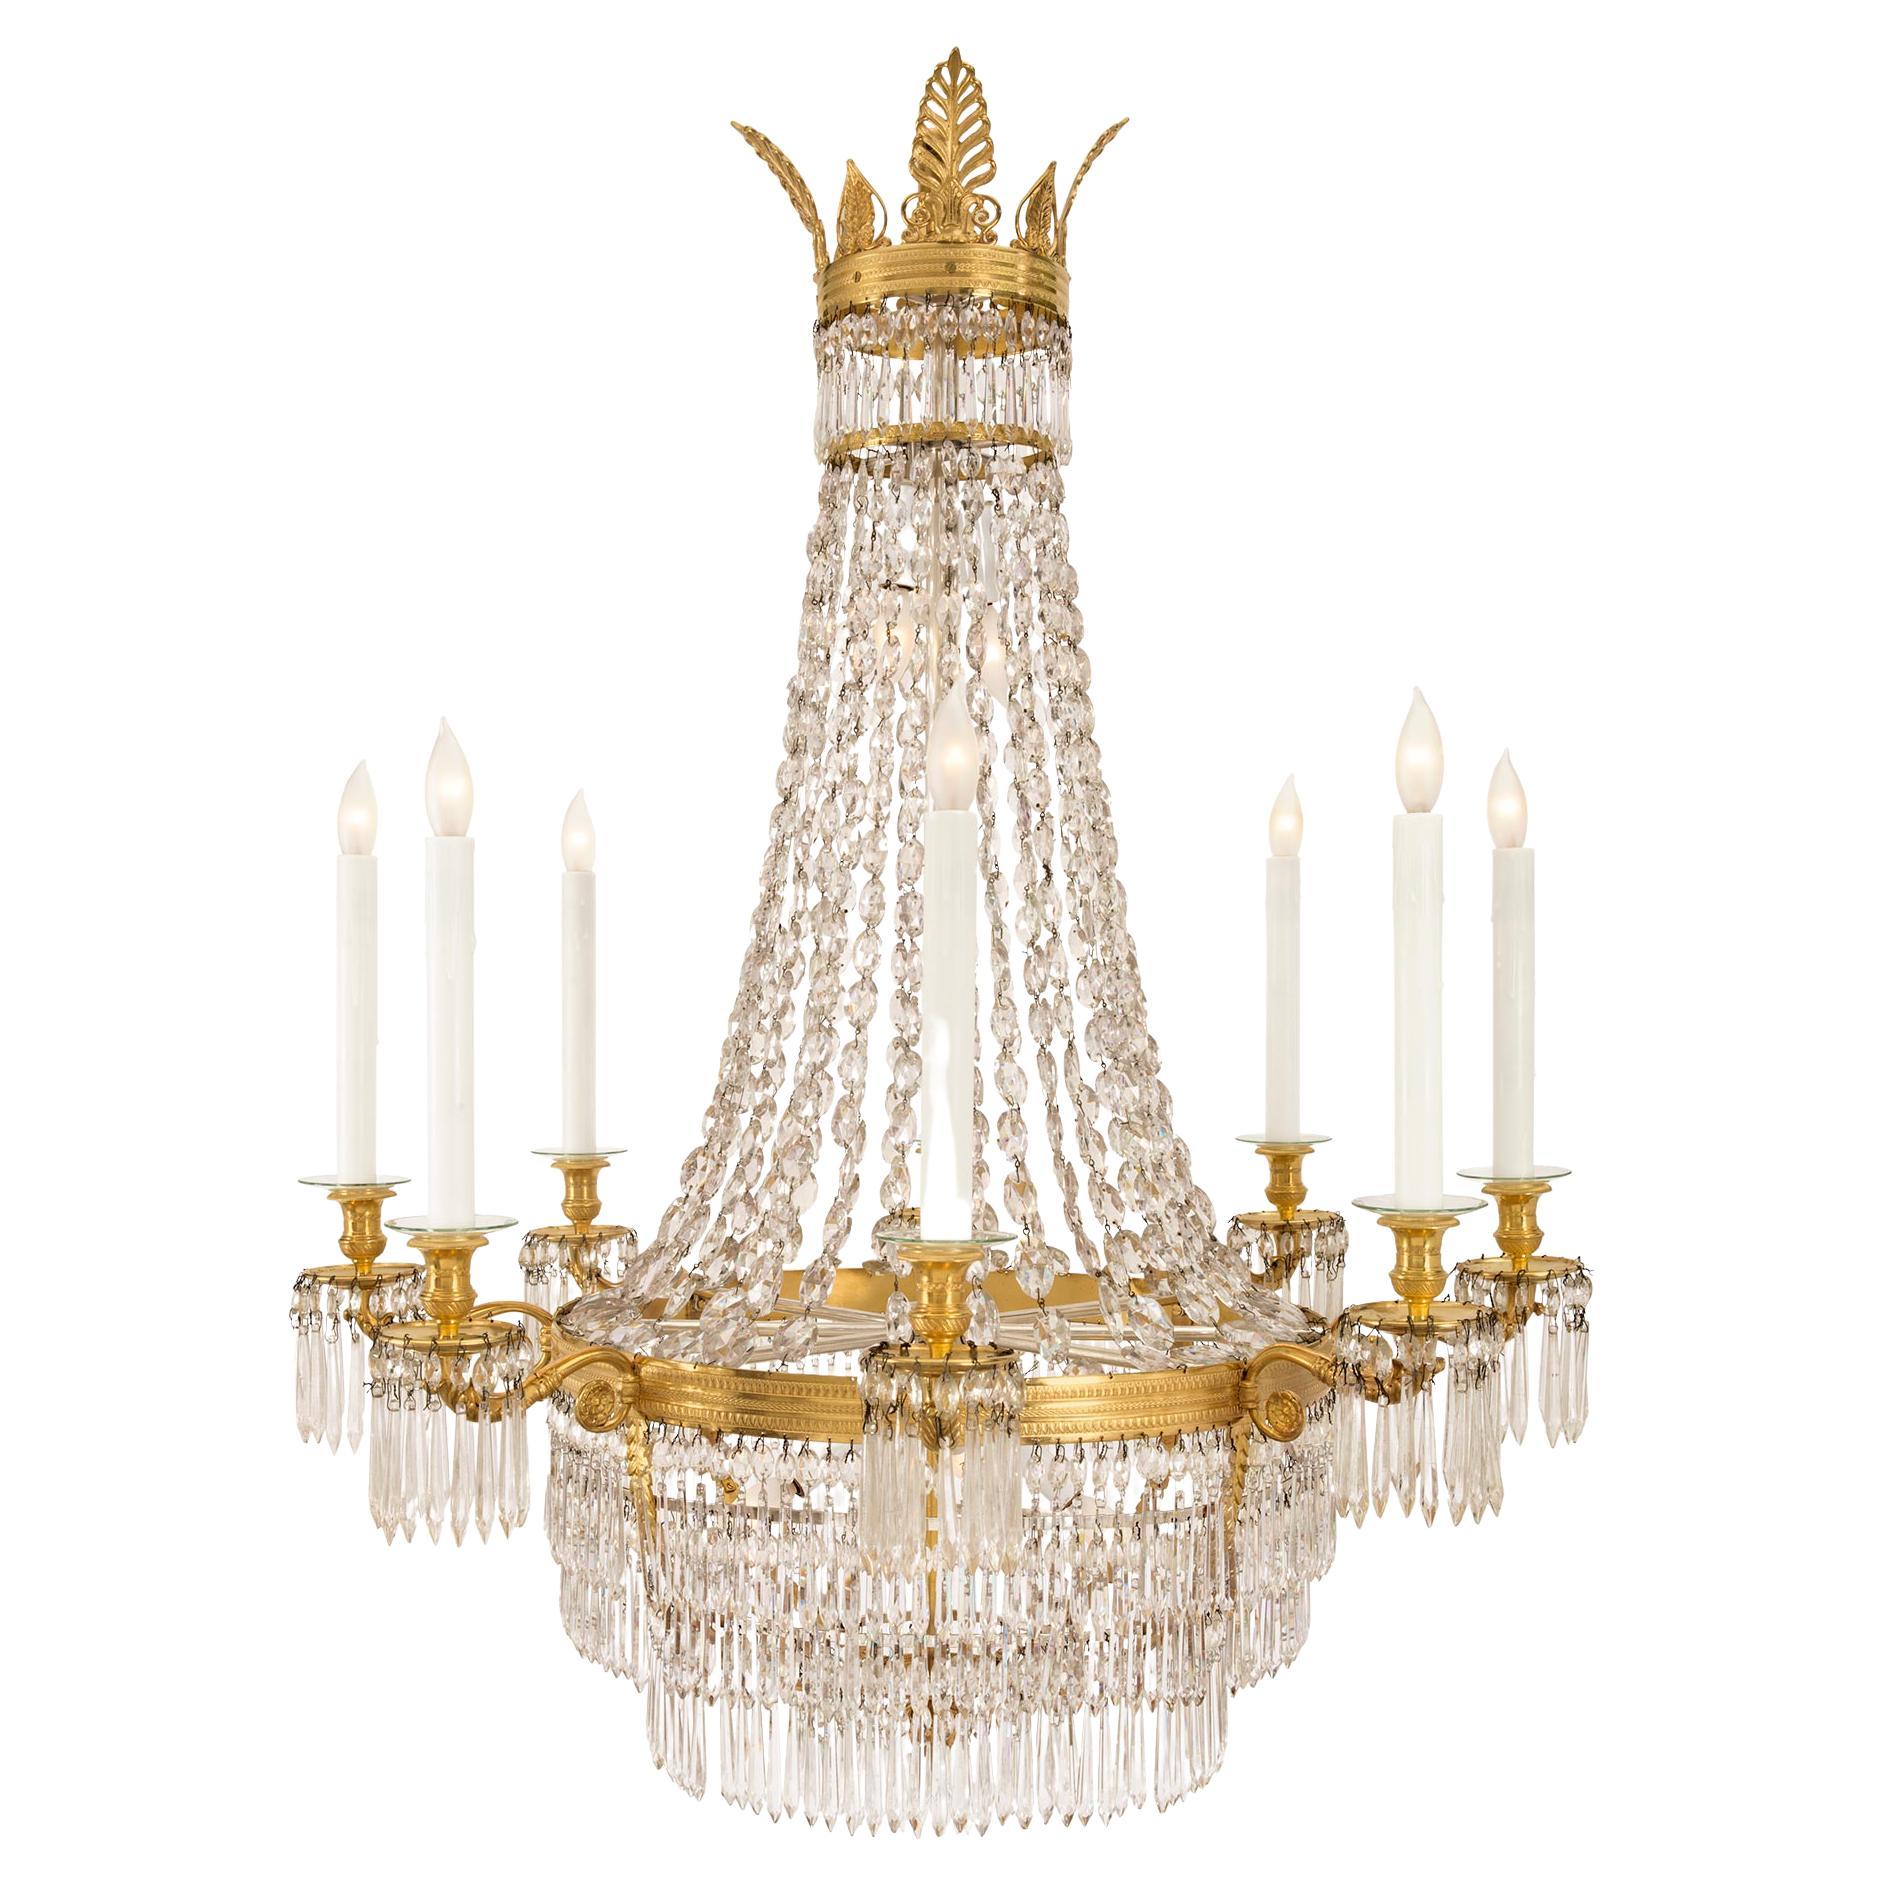 French 19th Century Neoclassical Style Ormolu and Baccarat Crystal Chandelier For Sale